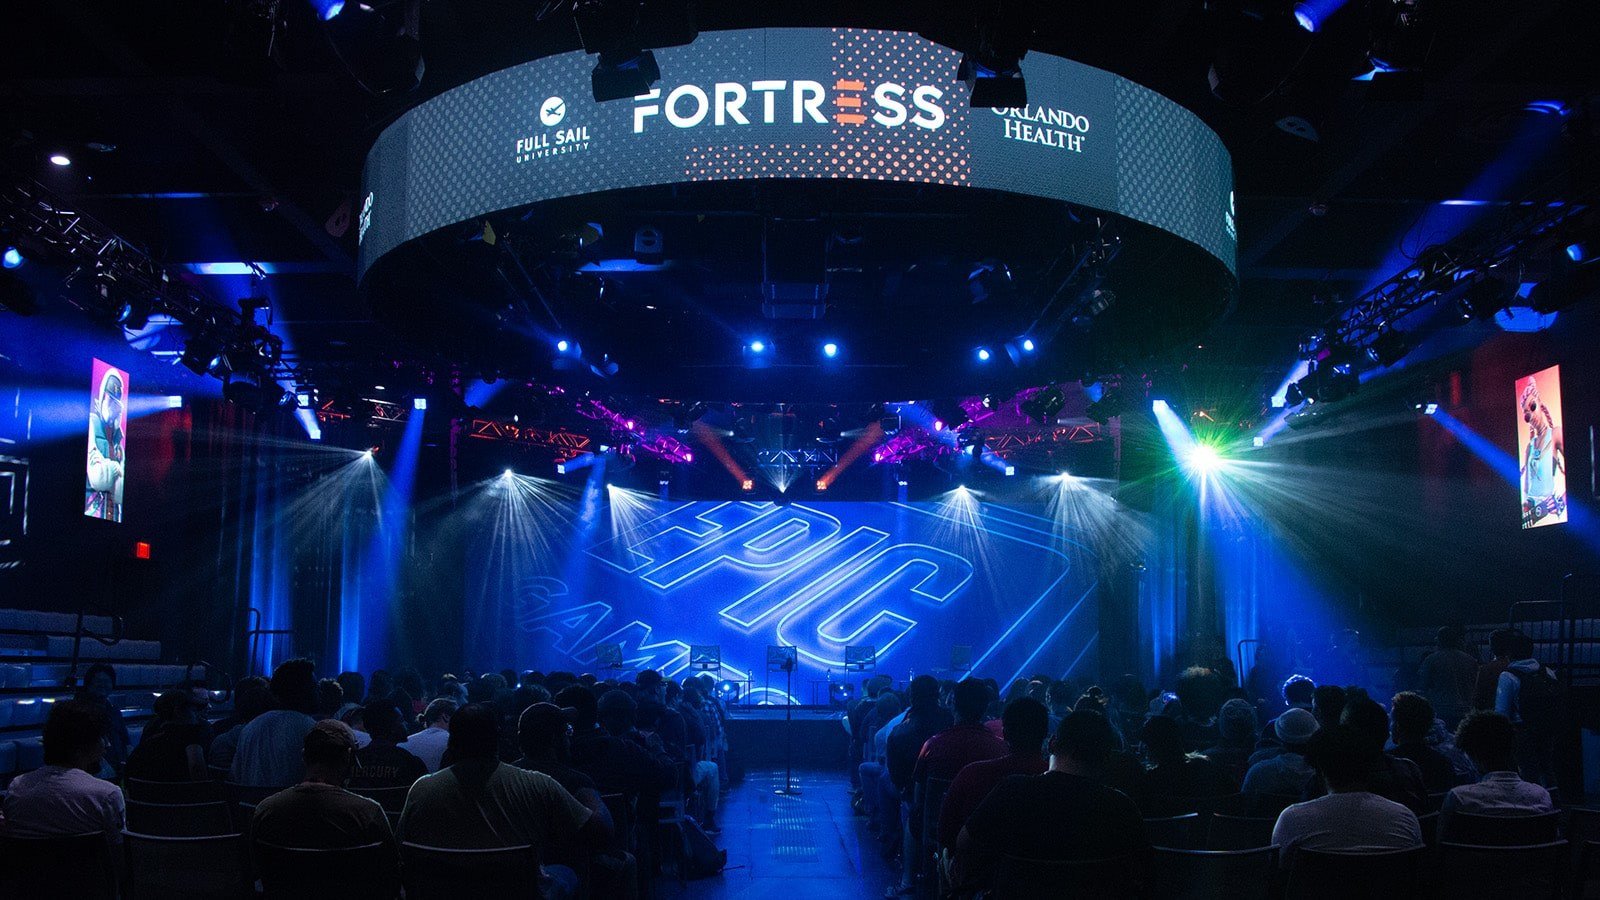 The Full Sail University Orlando Health Fortress stage with the Epic Games logo featured on the large LED screen.